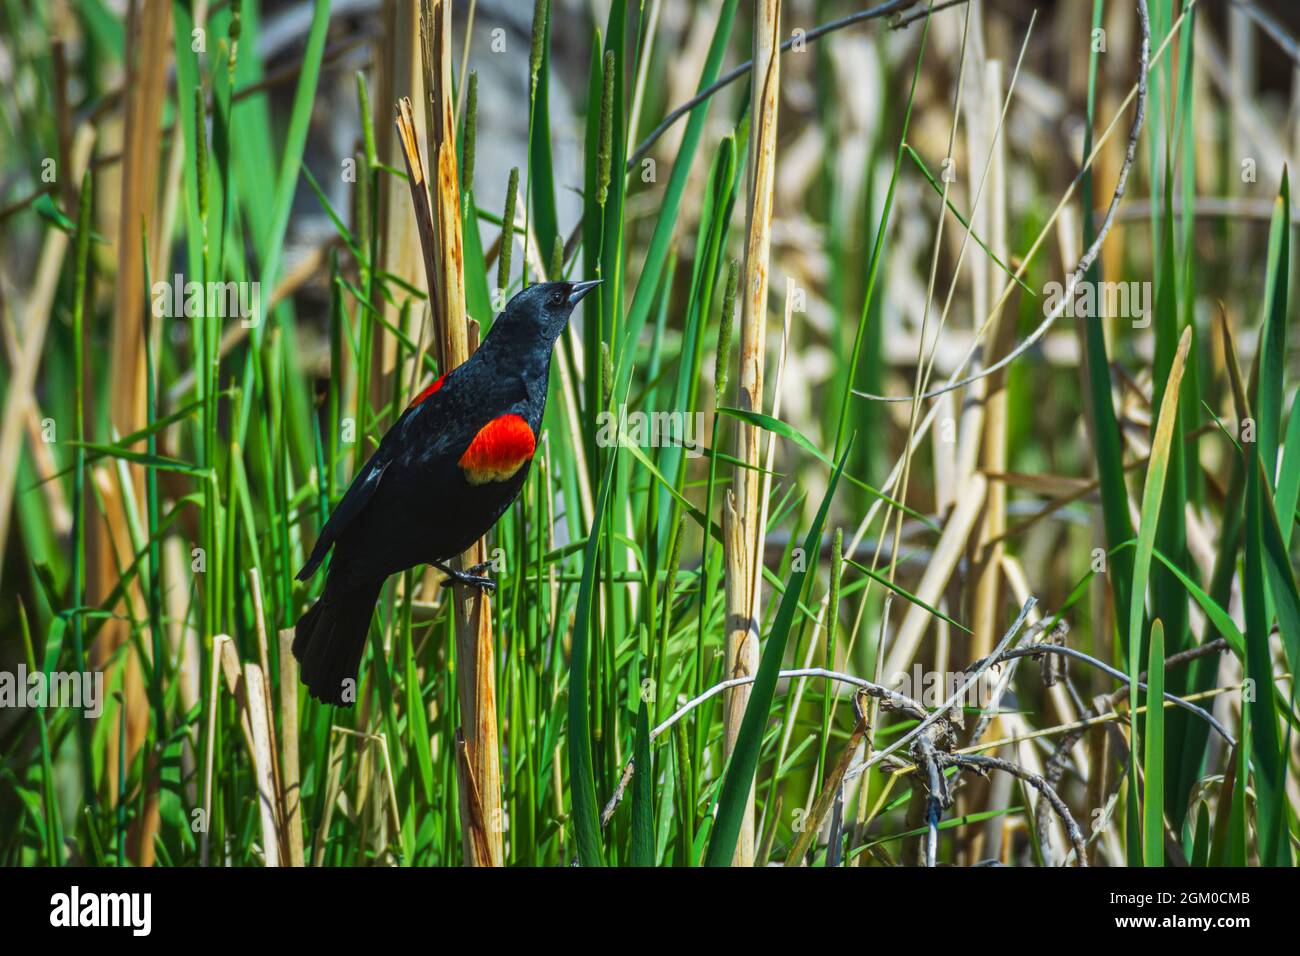 Male Red-Winged Blackbird (Agelaius phoeniceus) showing it's red territorial display in Cattail marsh, Castle Rock Colorado USA. Photo taken in May. Stock Photo